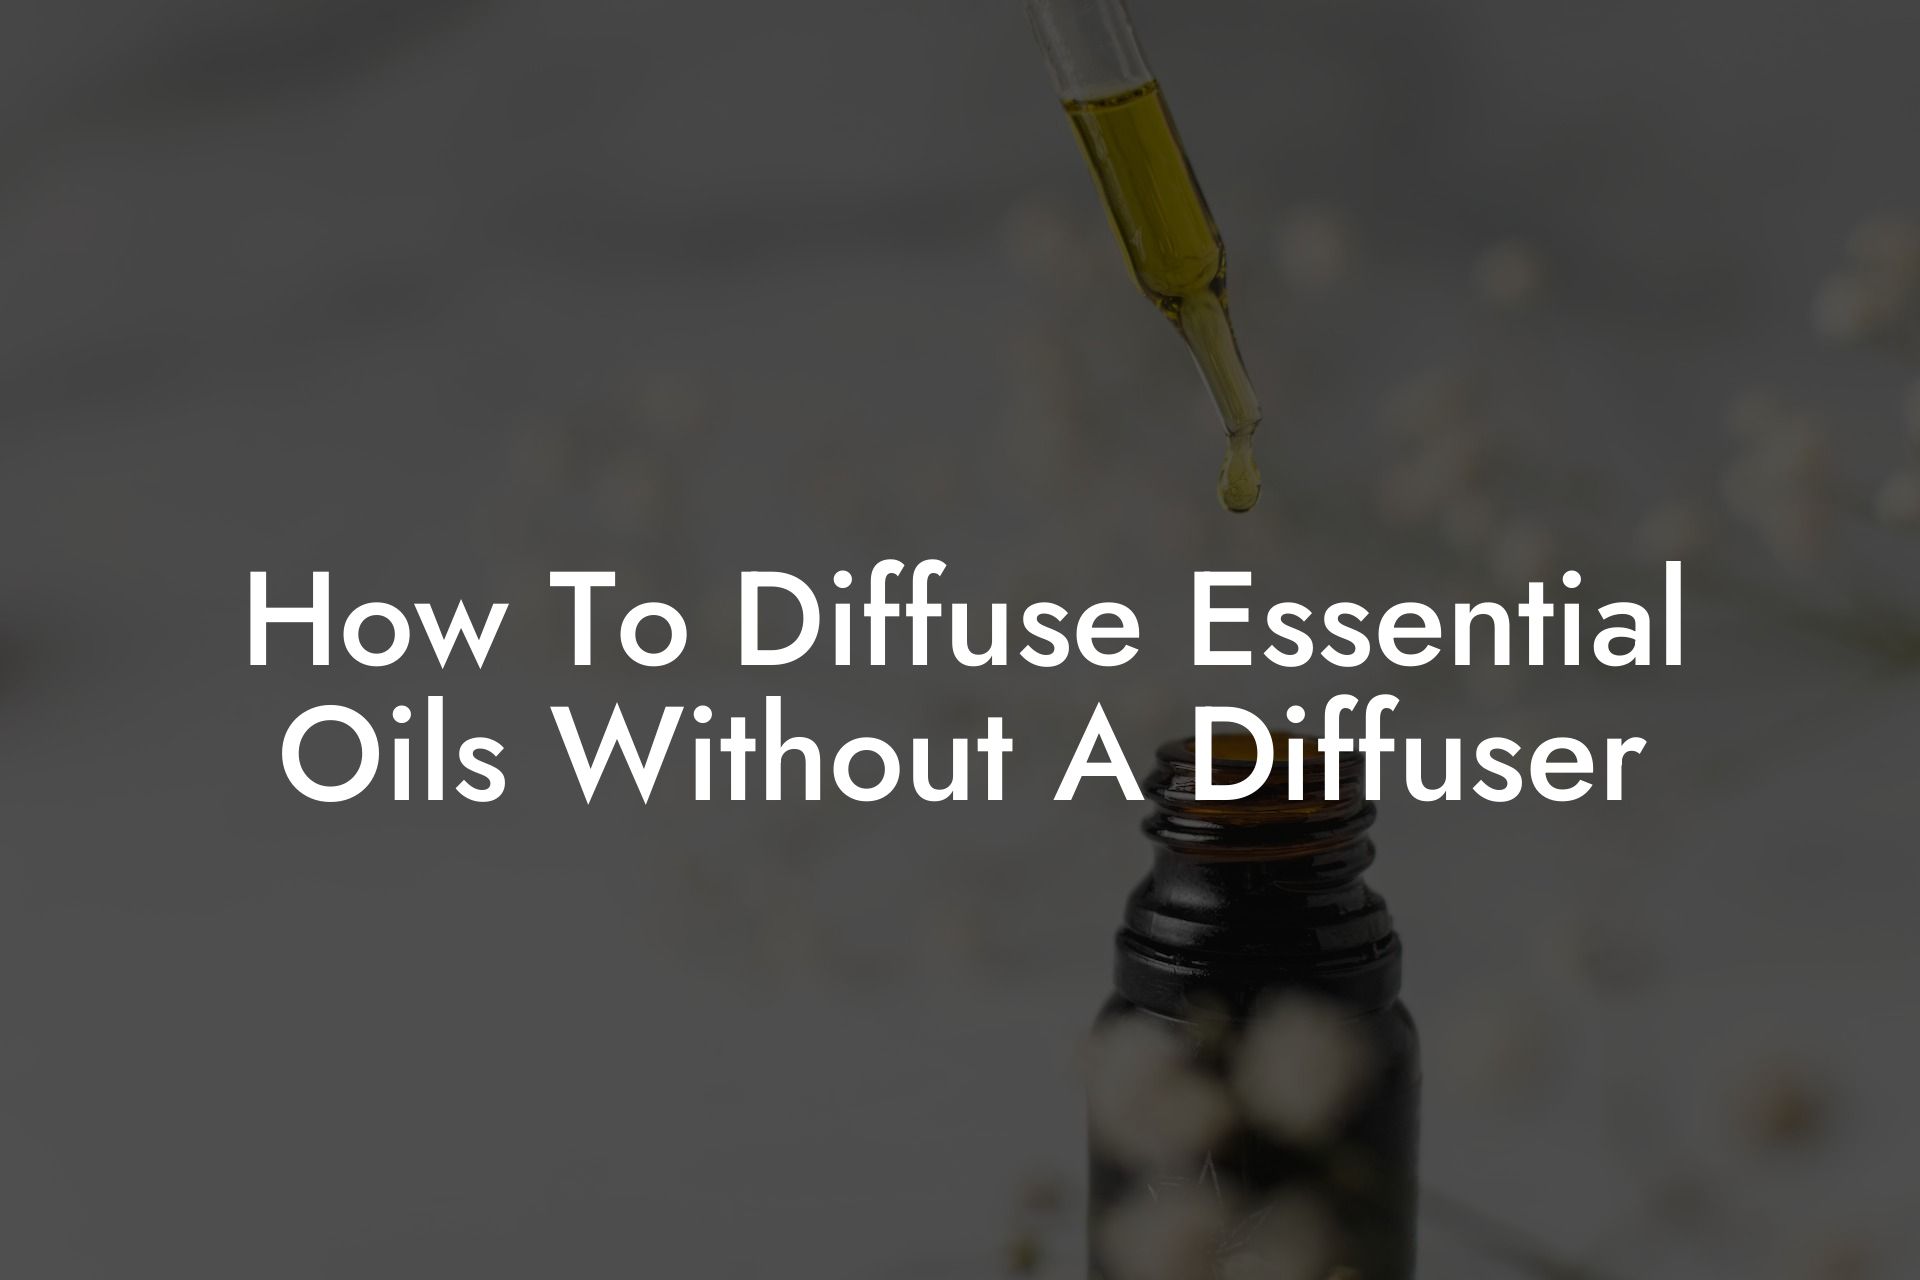 How To Diffuse Essential Oils Without A Diffuser